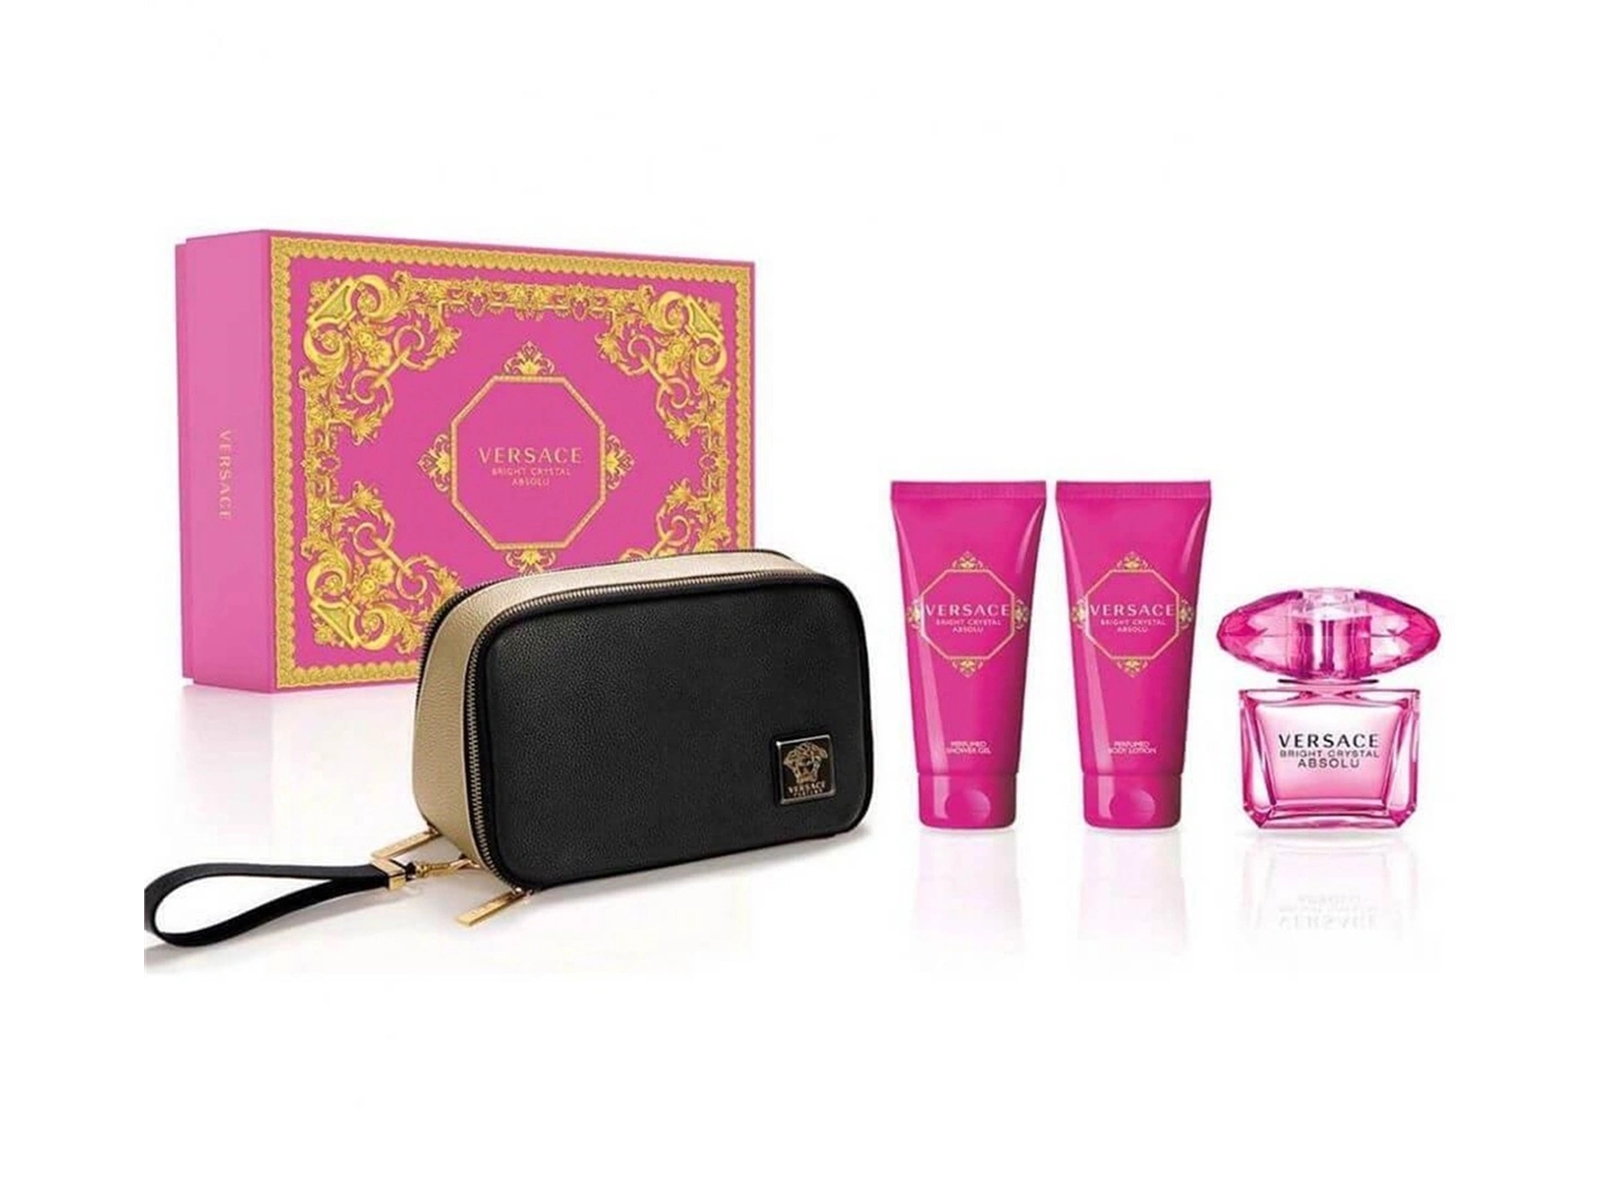 Versace Bright Crystal Absolu EDT 4 Piece Perfume Gift Set For Women at Ratans Online Shop - Perfumes Wholesale and Retailer Gift Set